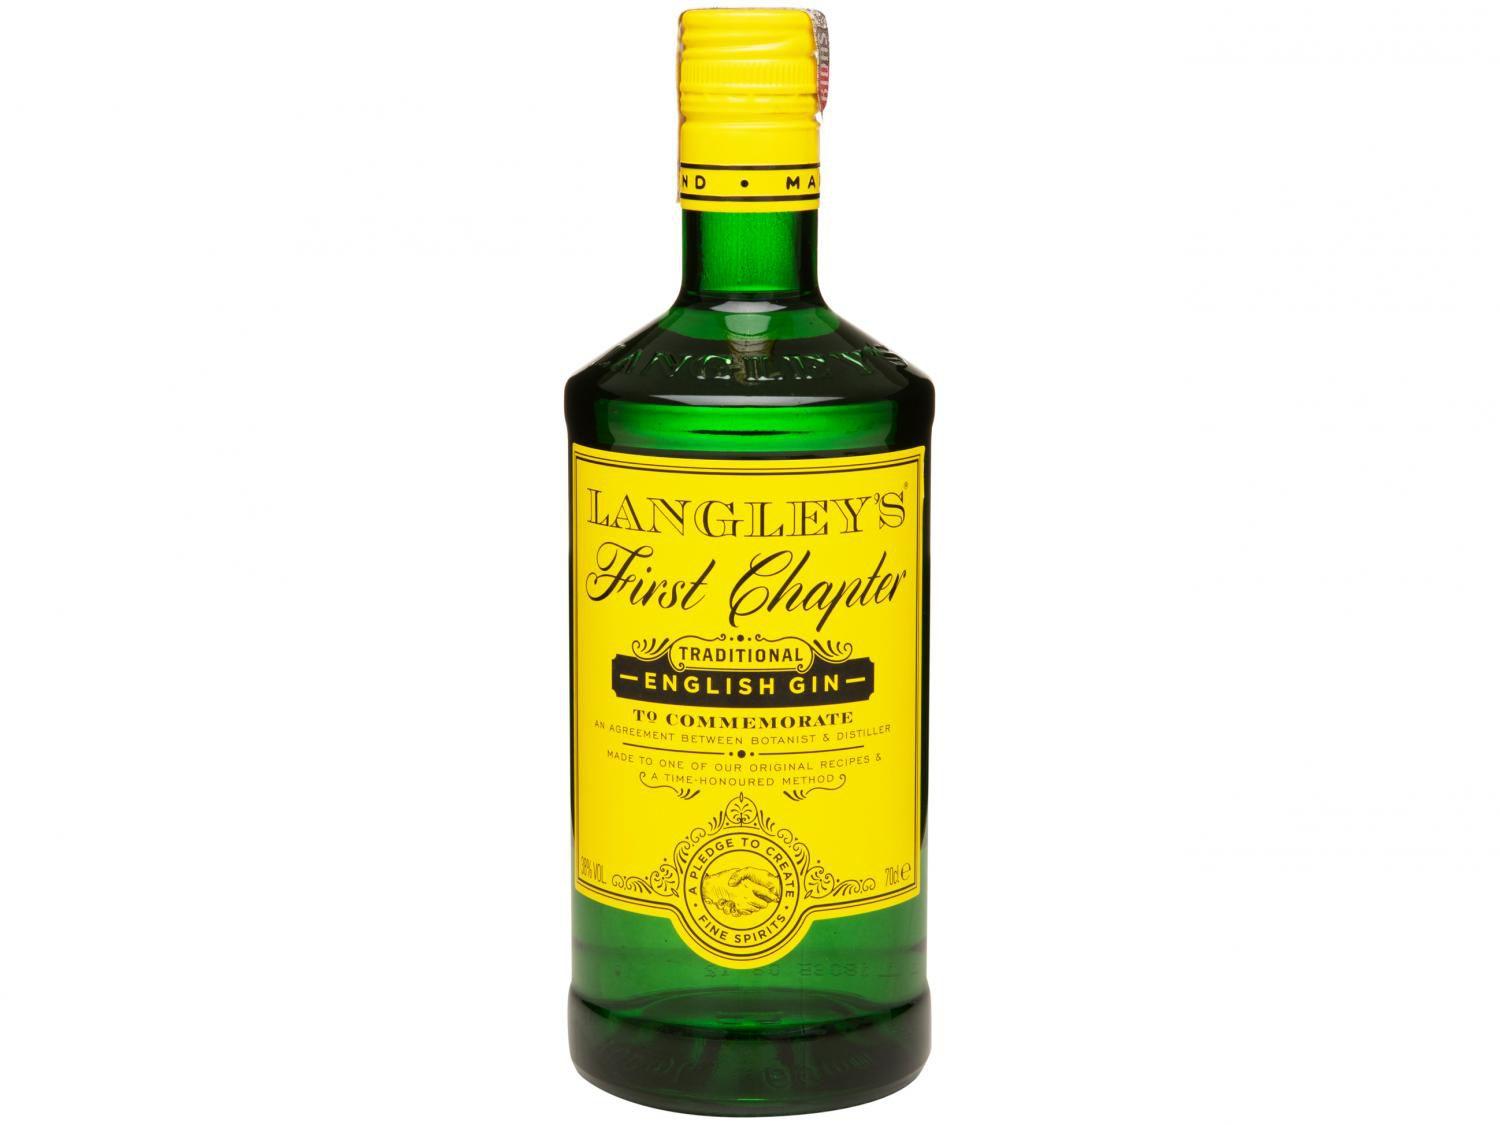 Gin Langleys London Dry Seco First Chapter - 700ml